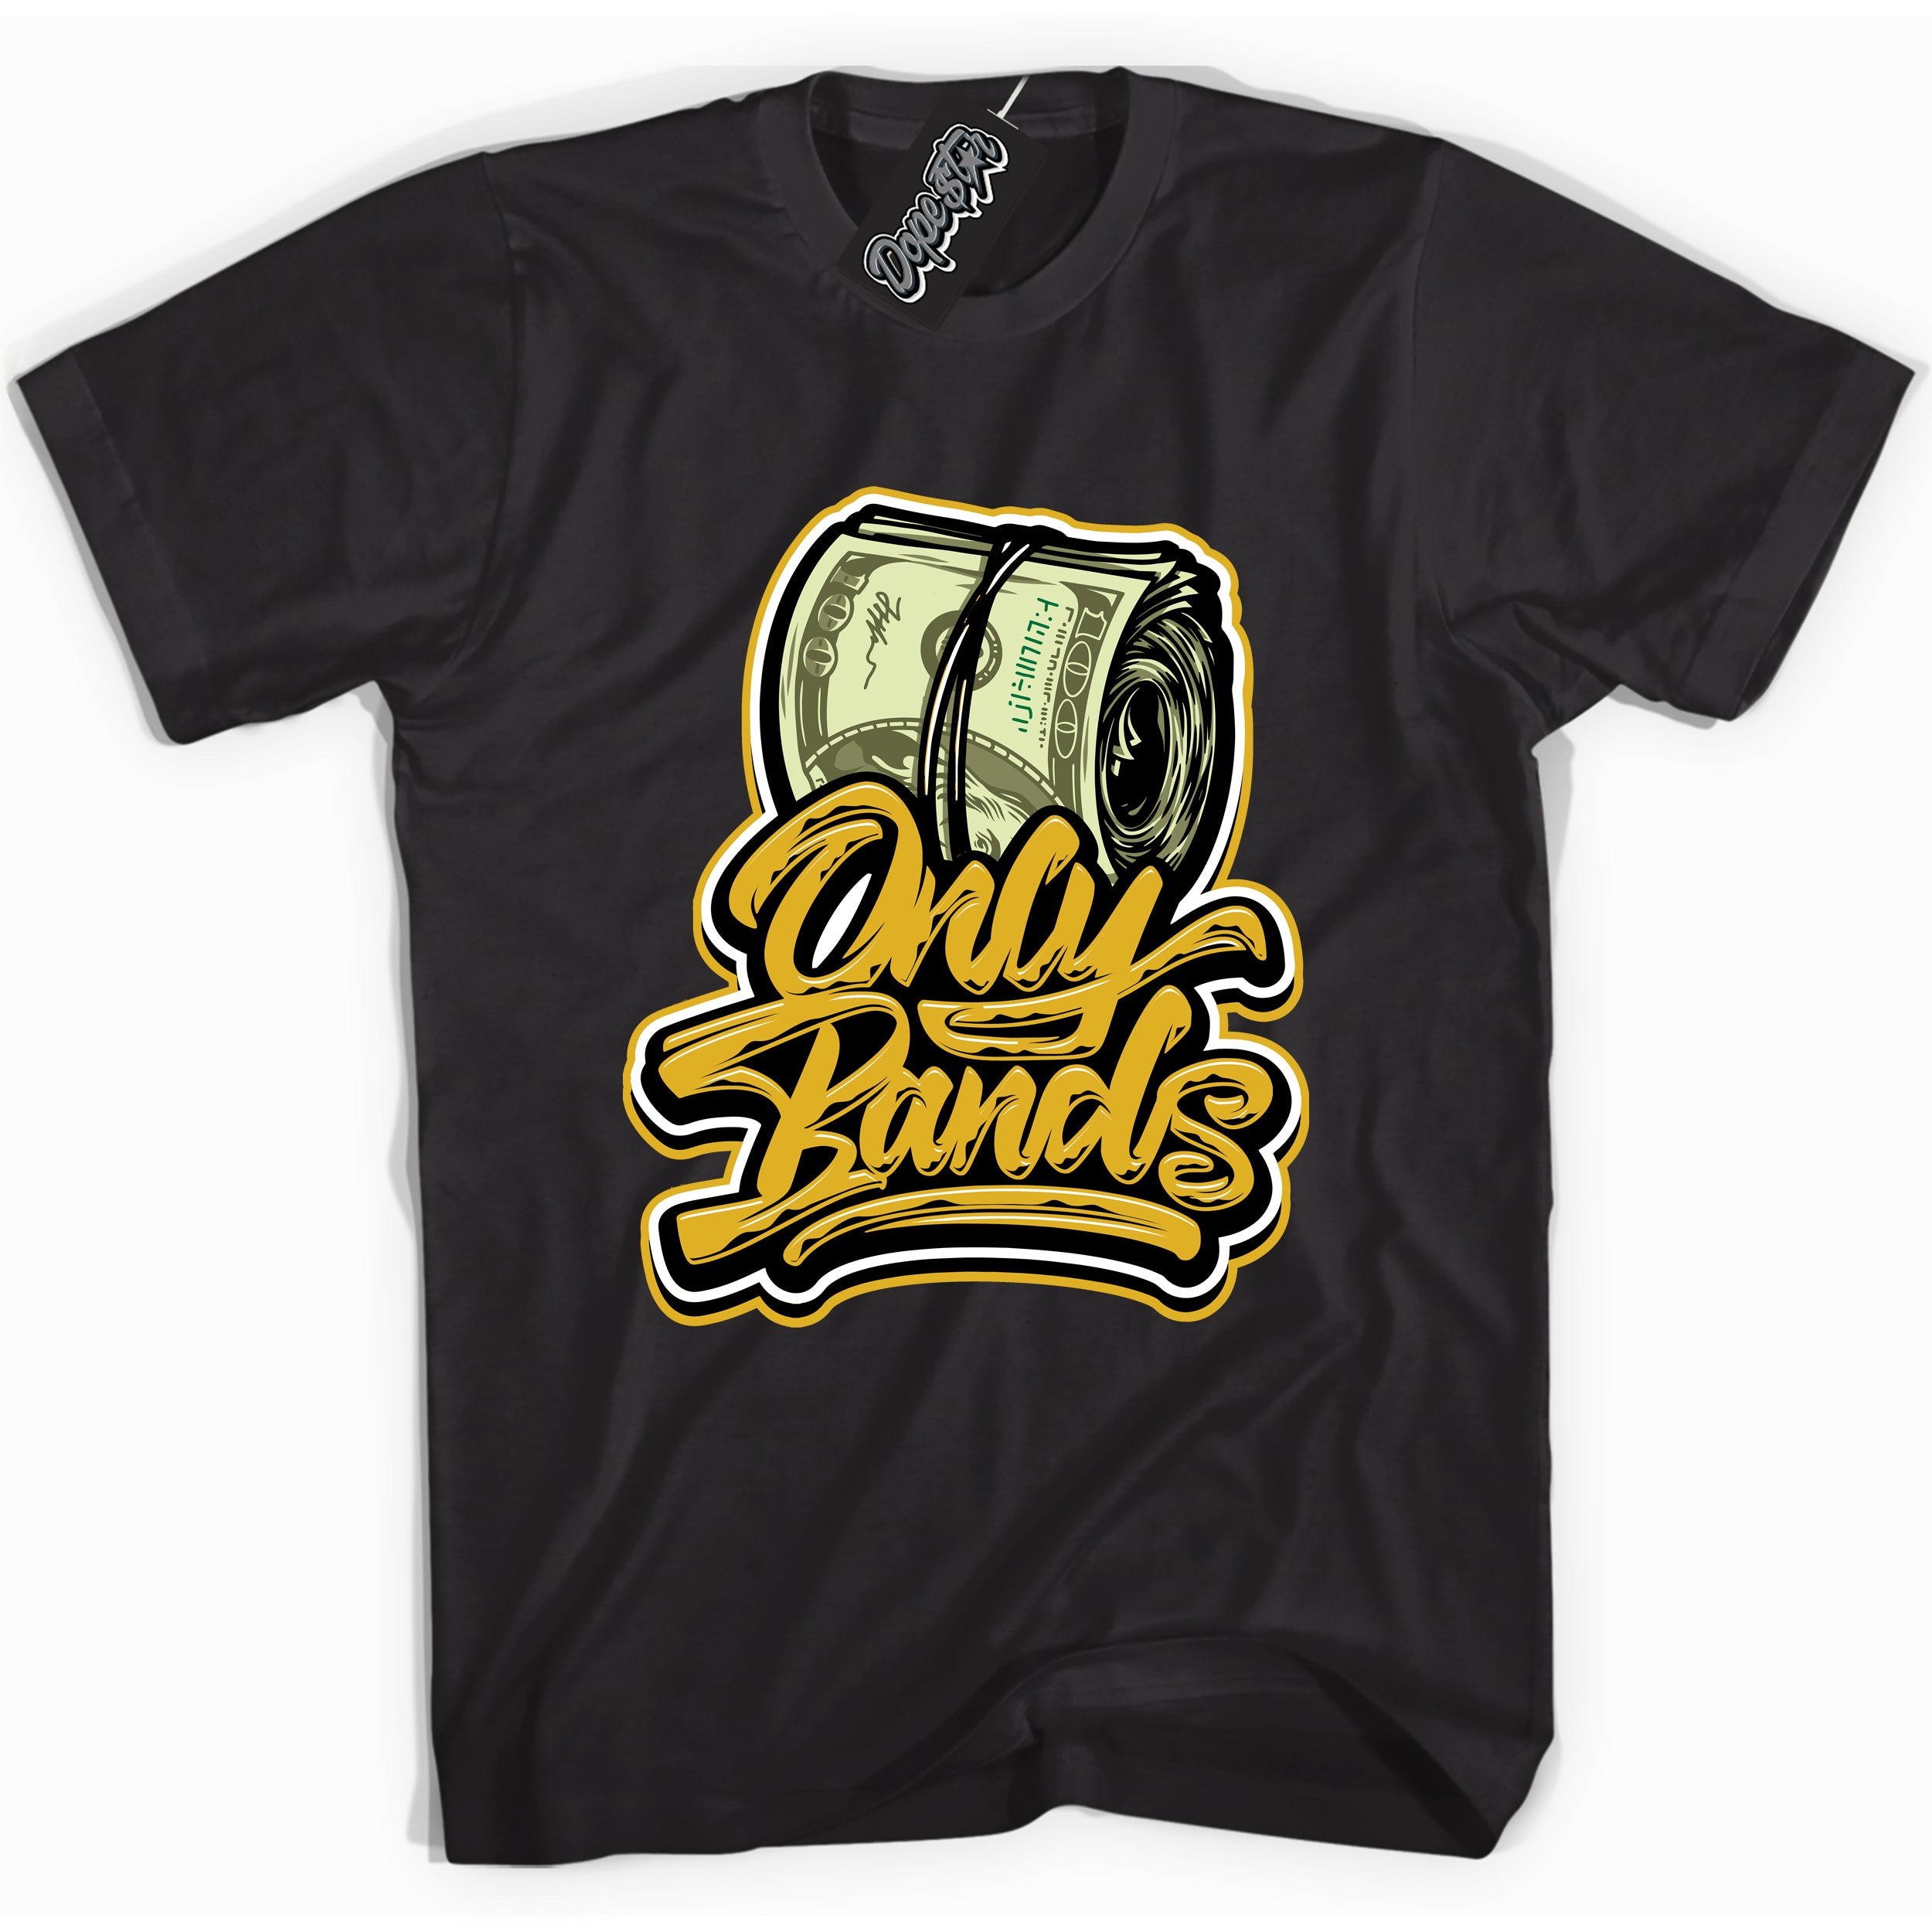 Cool Black Shirt with “ Only Bands ” design that perfectly matches Yellow Ochre 6s Sneakers.